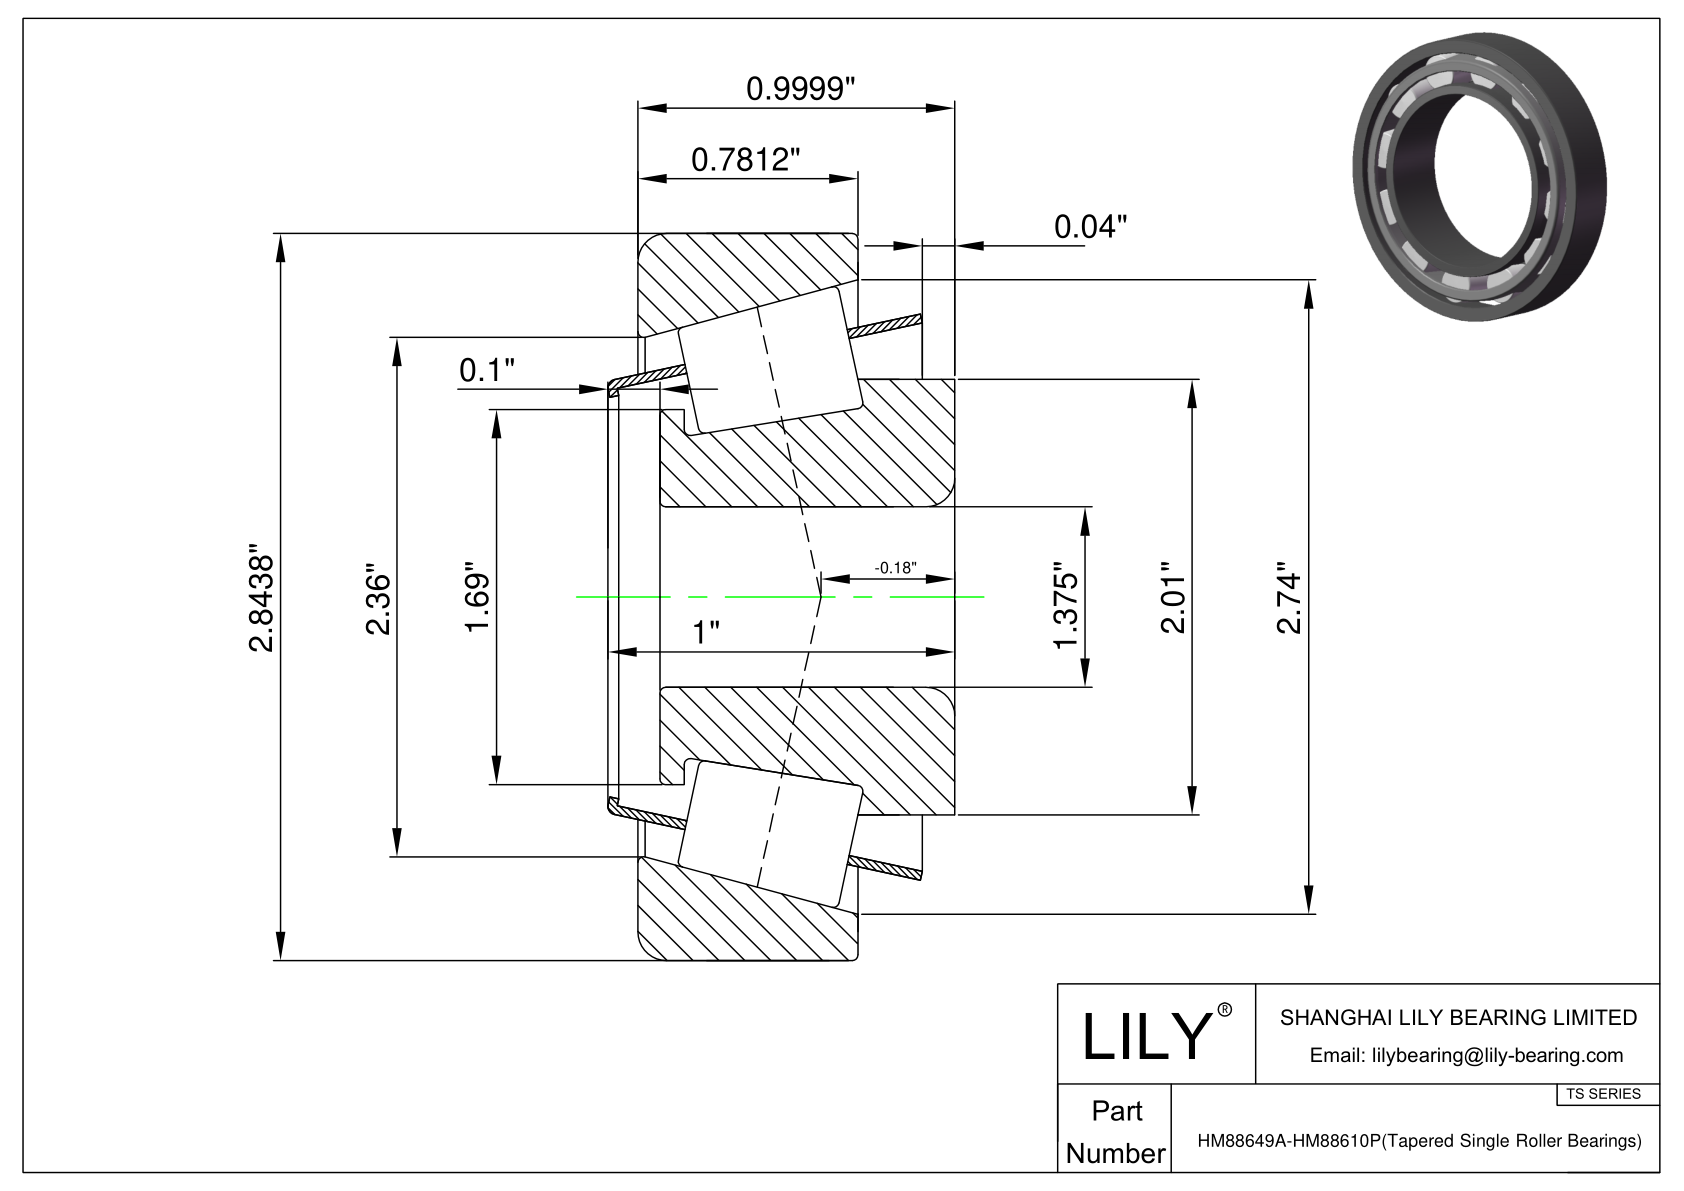 HM88649A-HM88610P TS (Tapered Single Roller Bearings) (Imperial) cad drawing